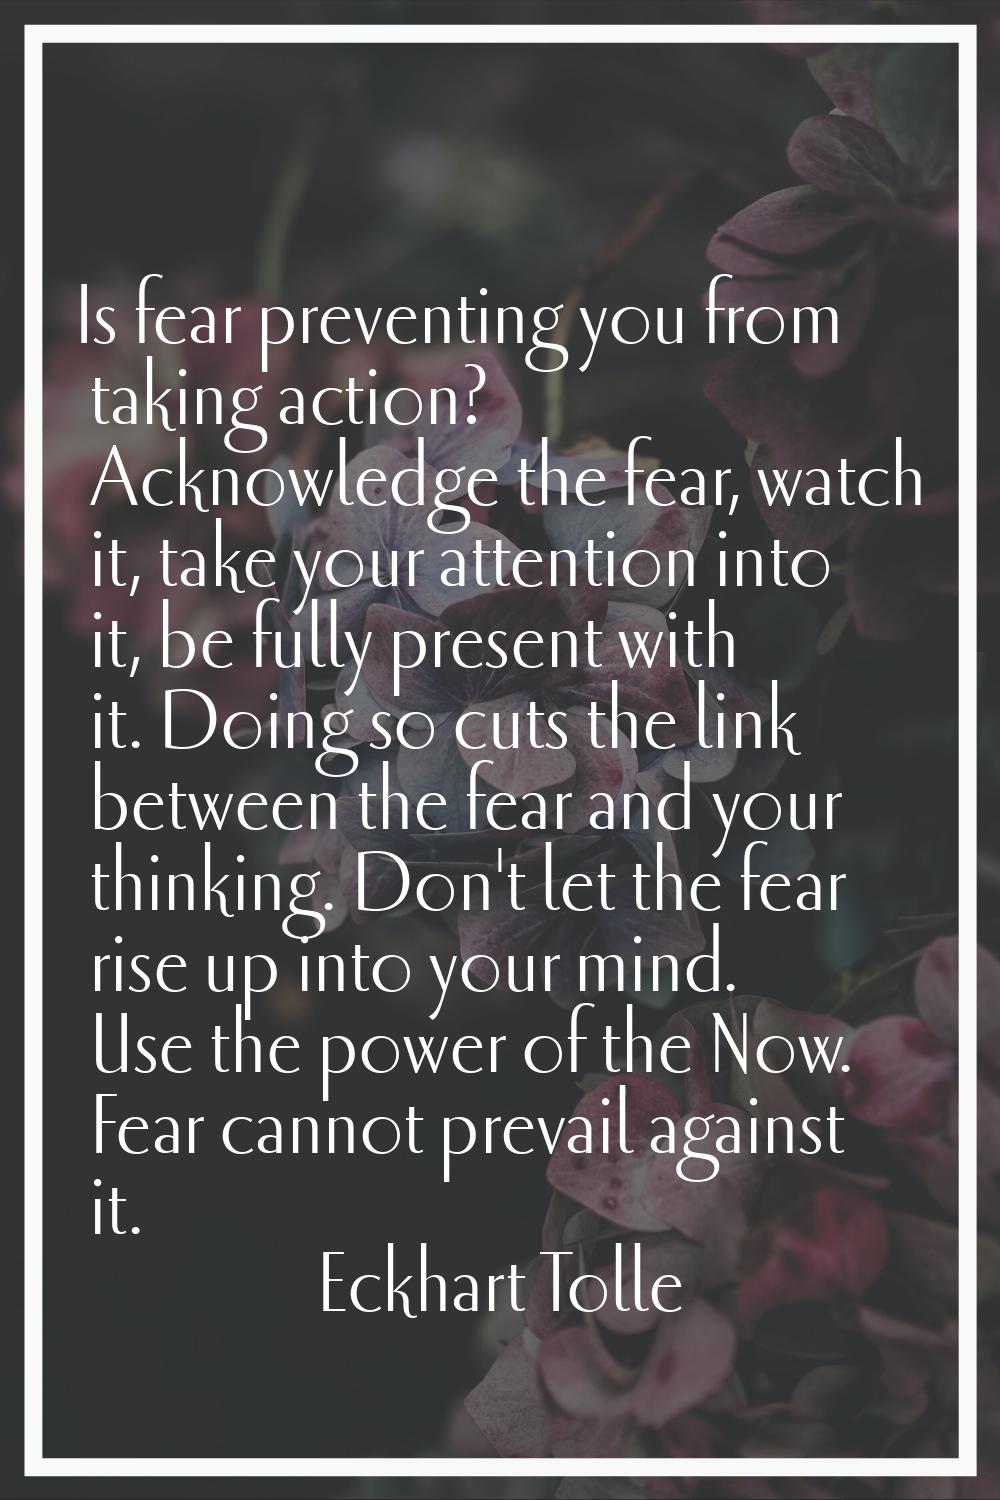 Is fear preventing you from taking action? Acknowledge the fear, watch it, take your attention into